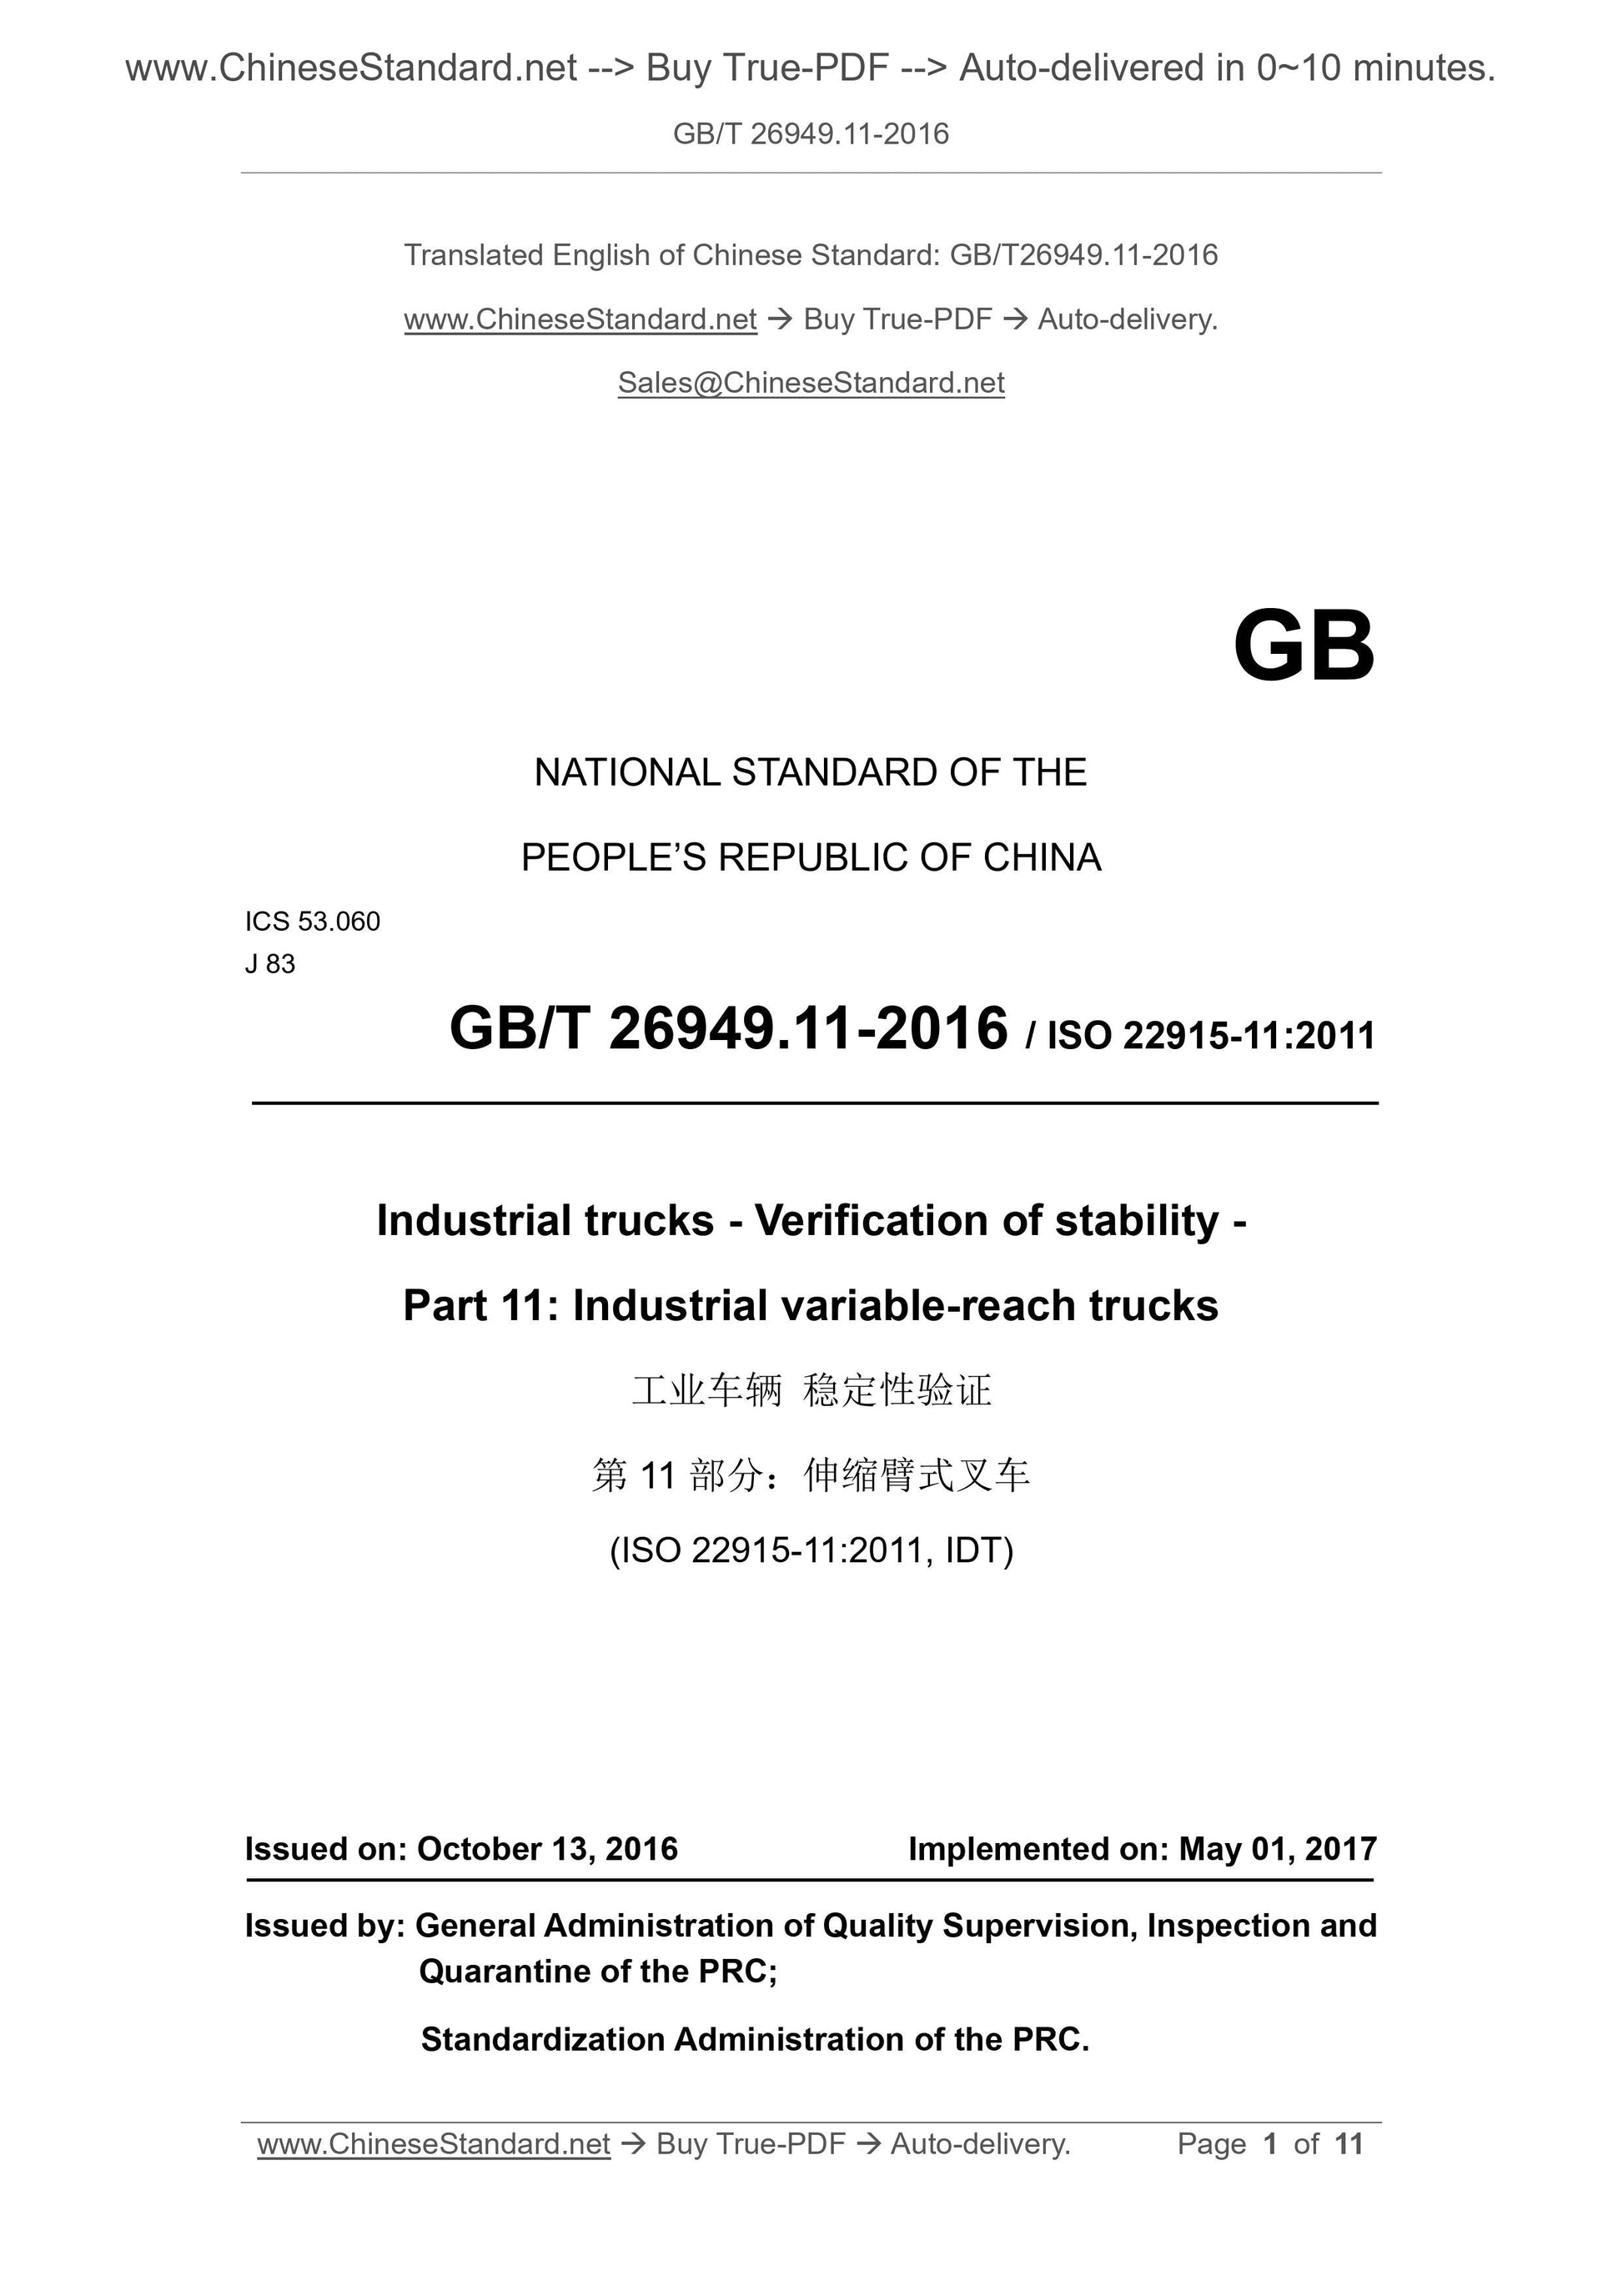 GB/T 26949.11-2016 Page 1